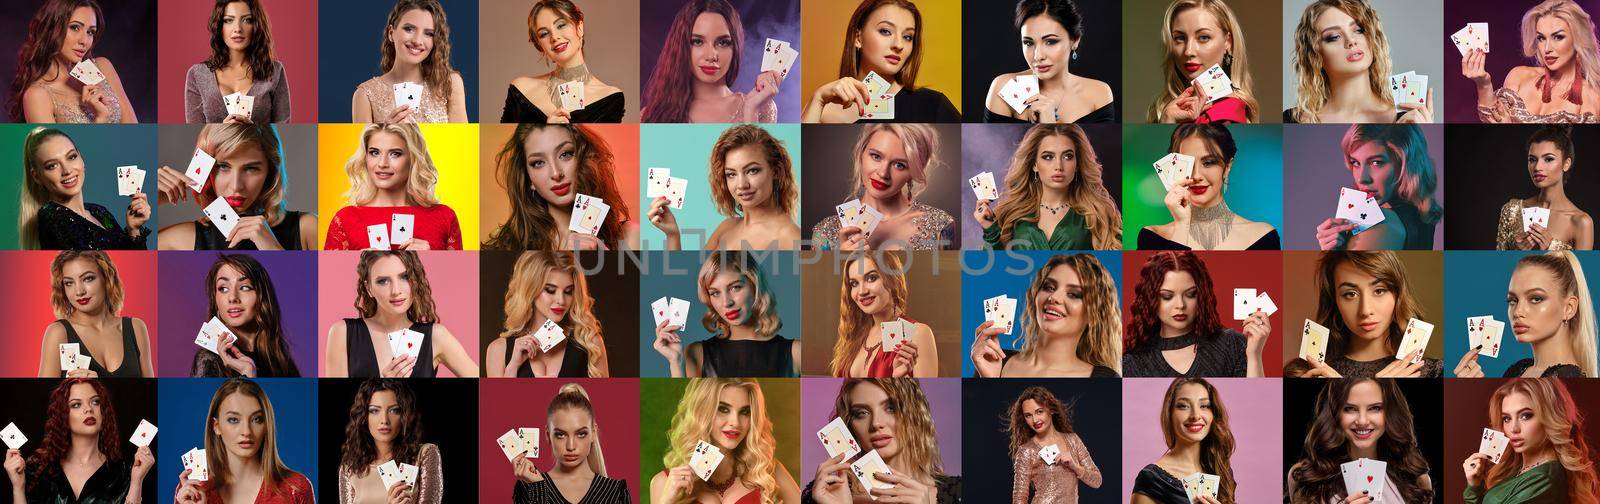 Collage of models with hairstyles, in stylish dresses and jewelry. They showing playing cards, posing on colorful backgrounds. Poker, casino. Close-up by nazarovsergey